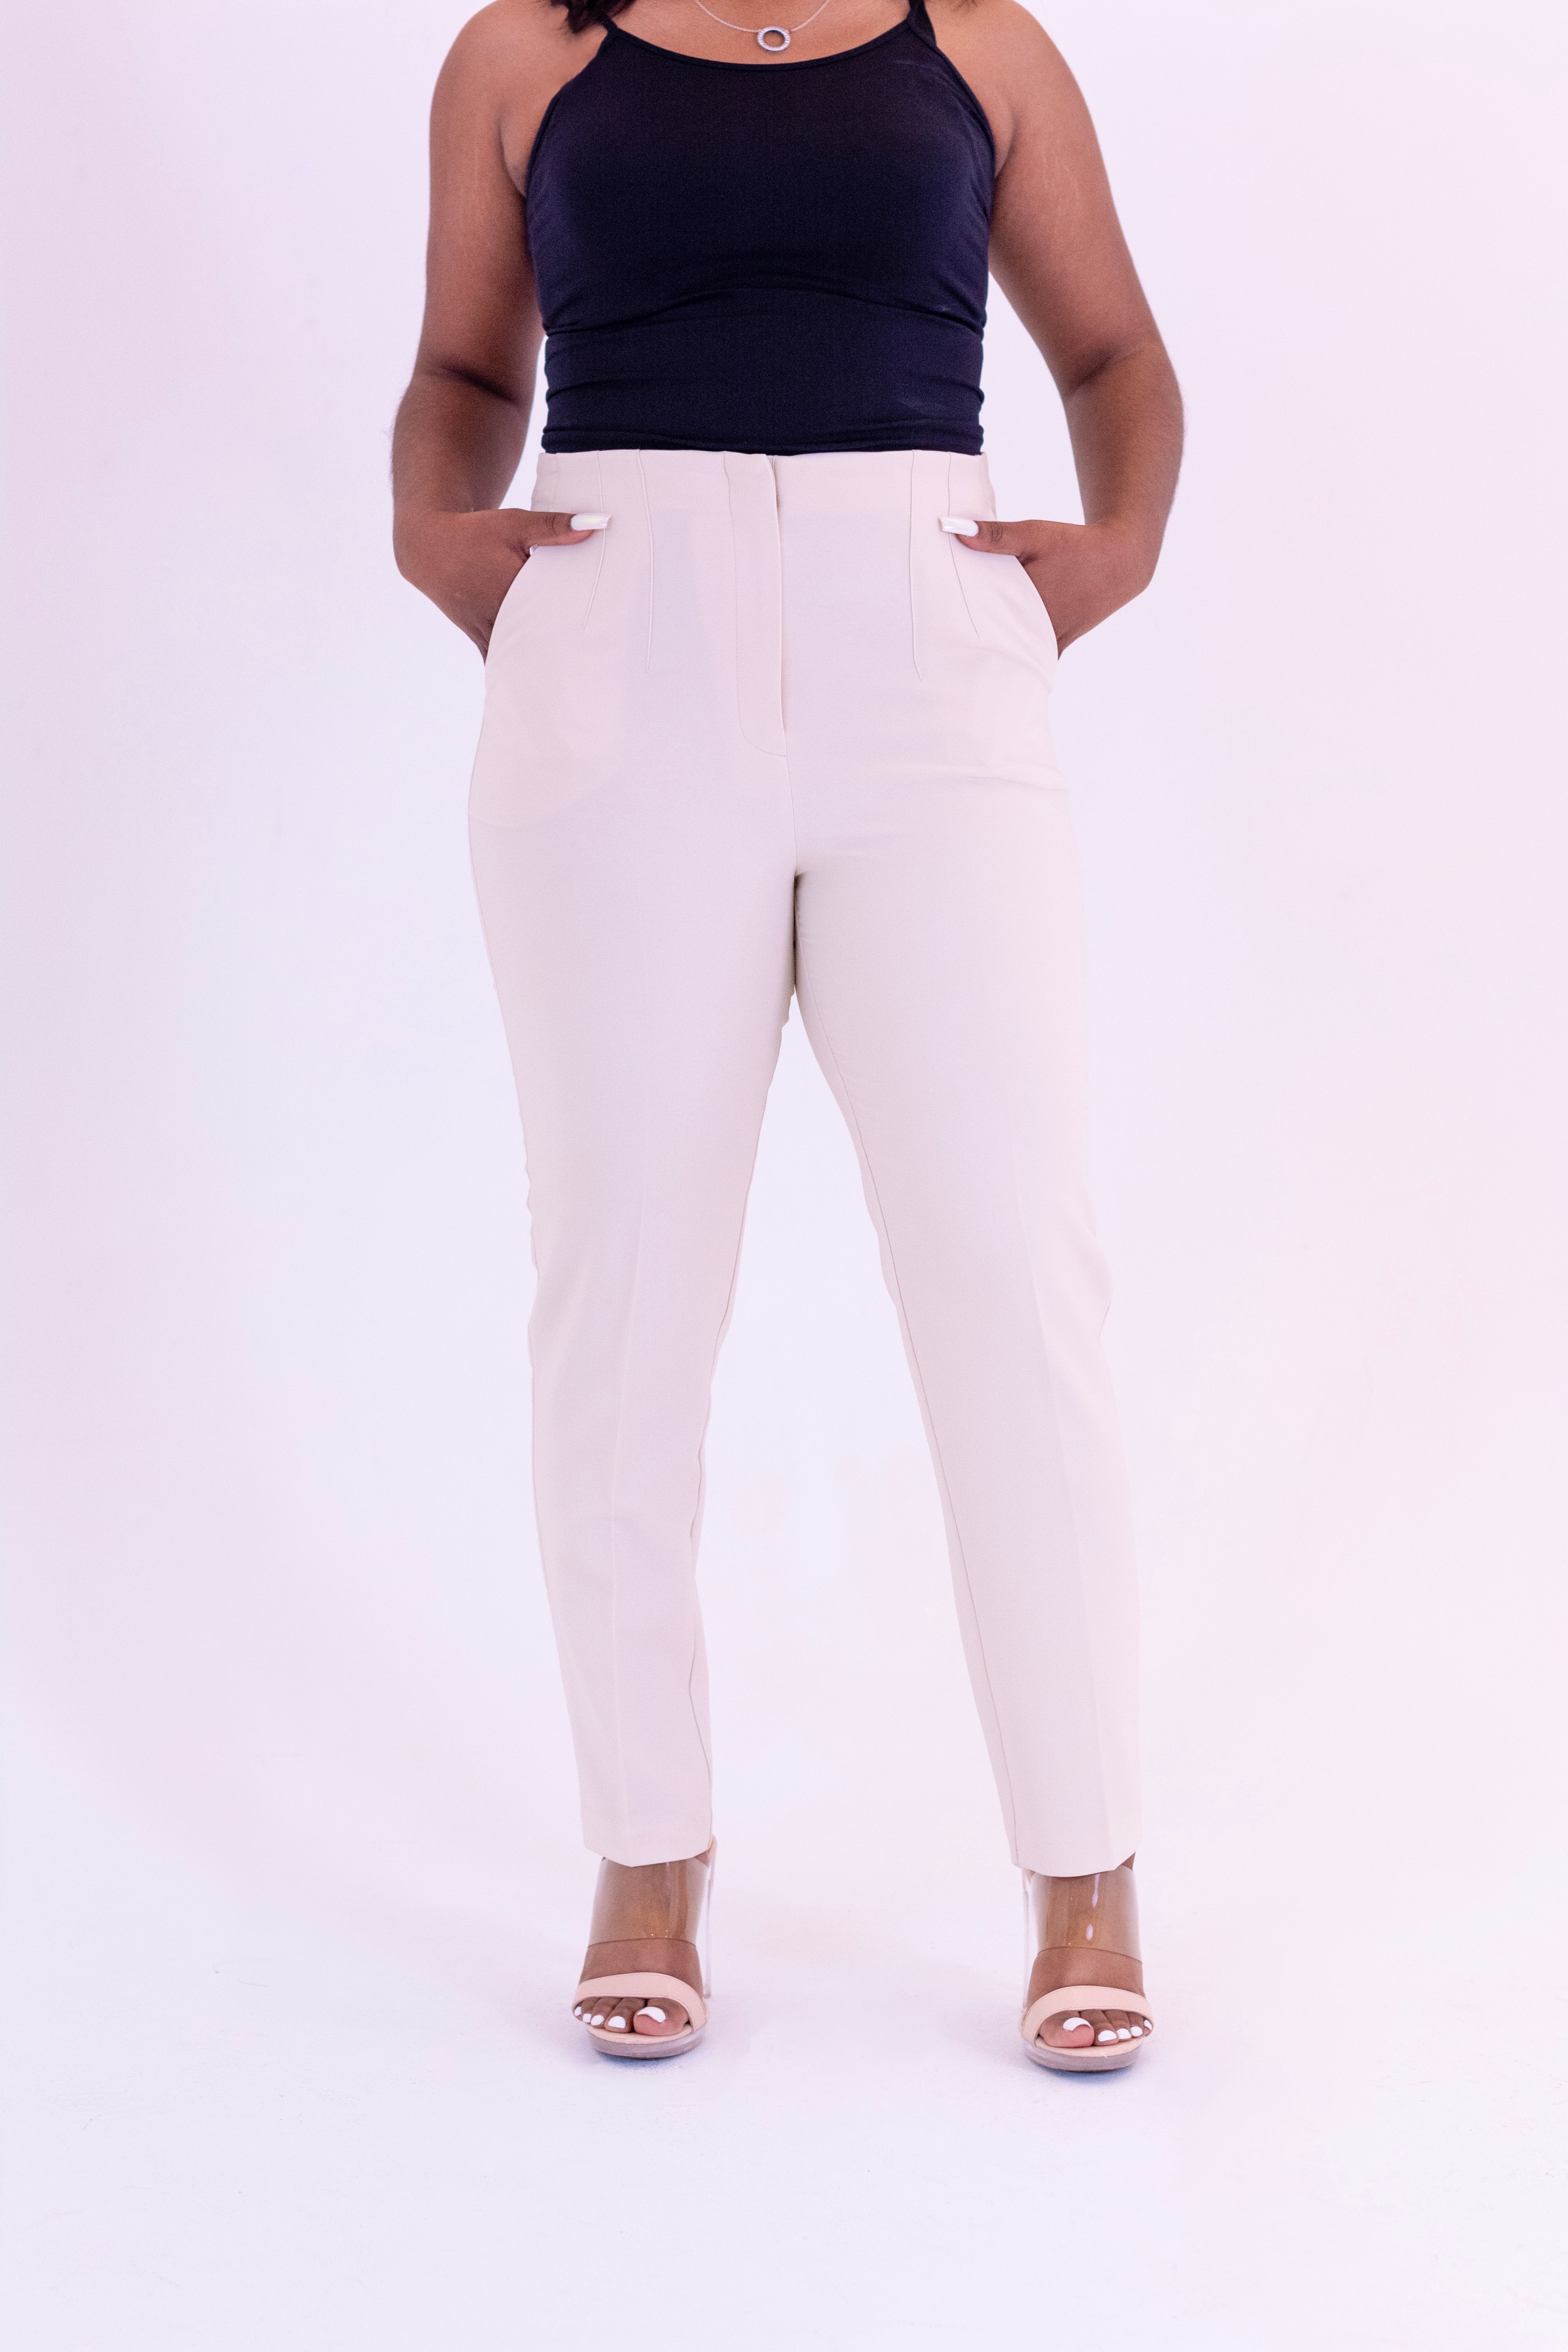 Women's tan/cream colored tailored pants with stretch fit and pockets